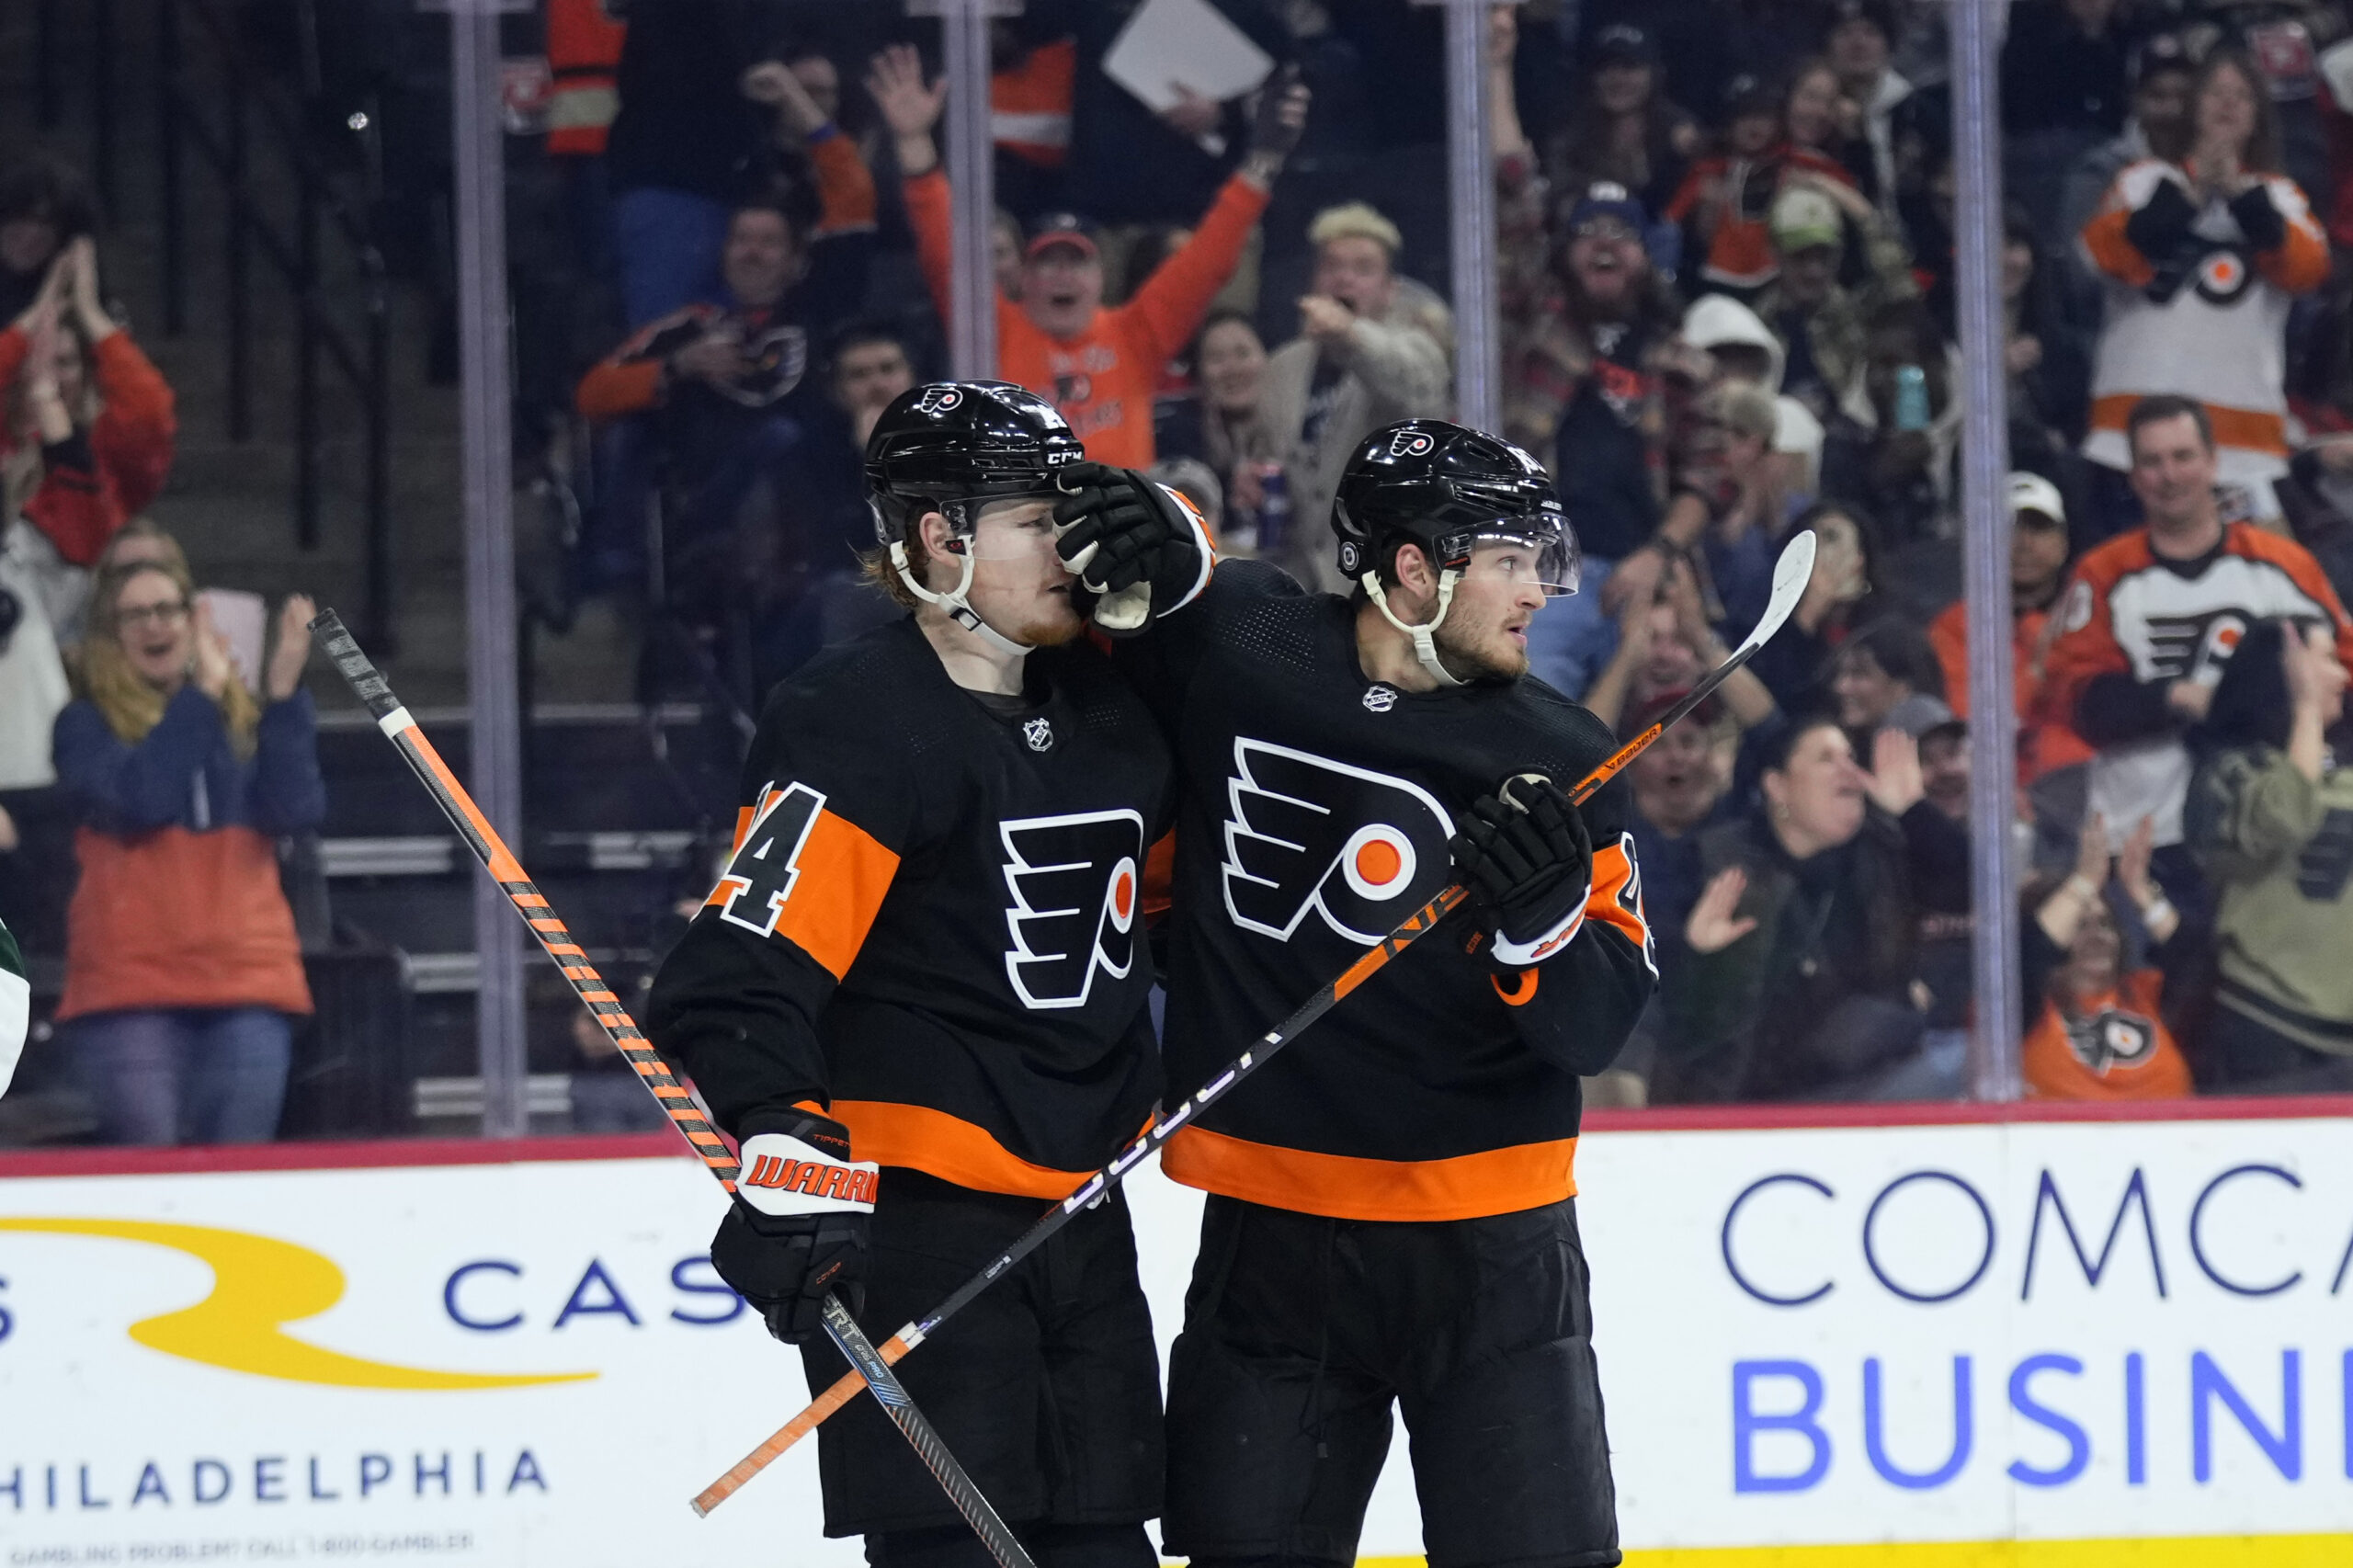 Why are the Philadelphia Flyers called the Flyers?